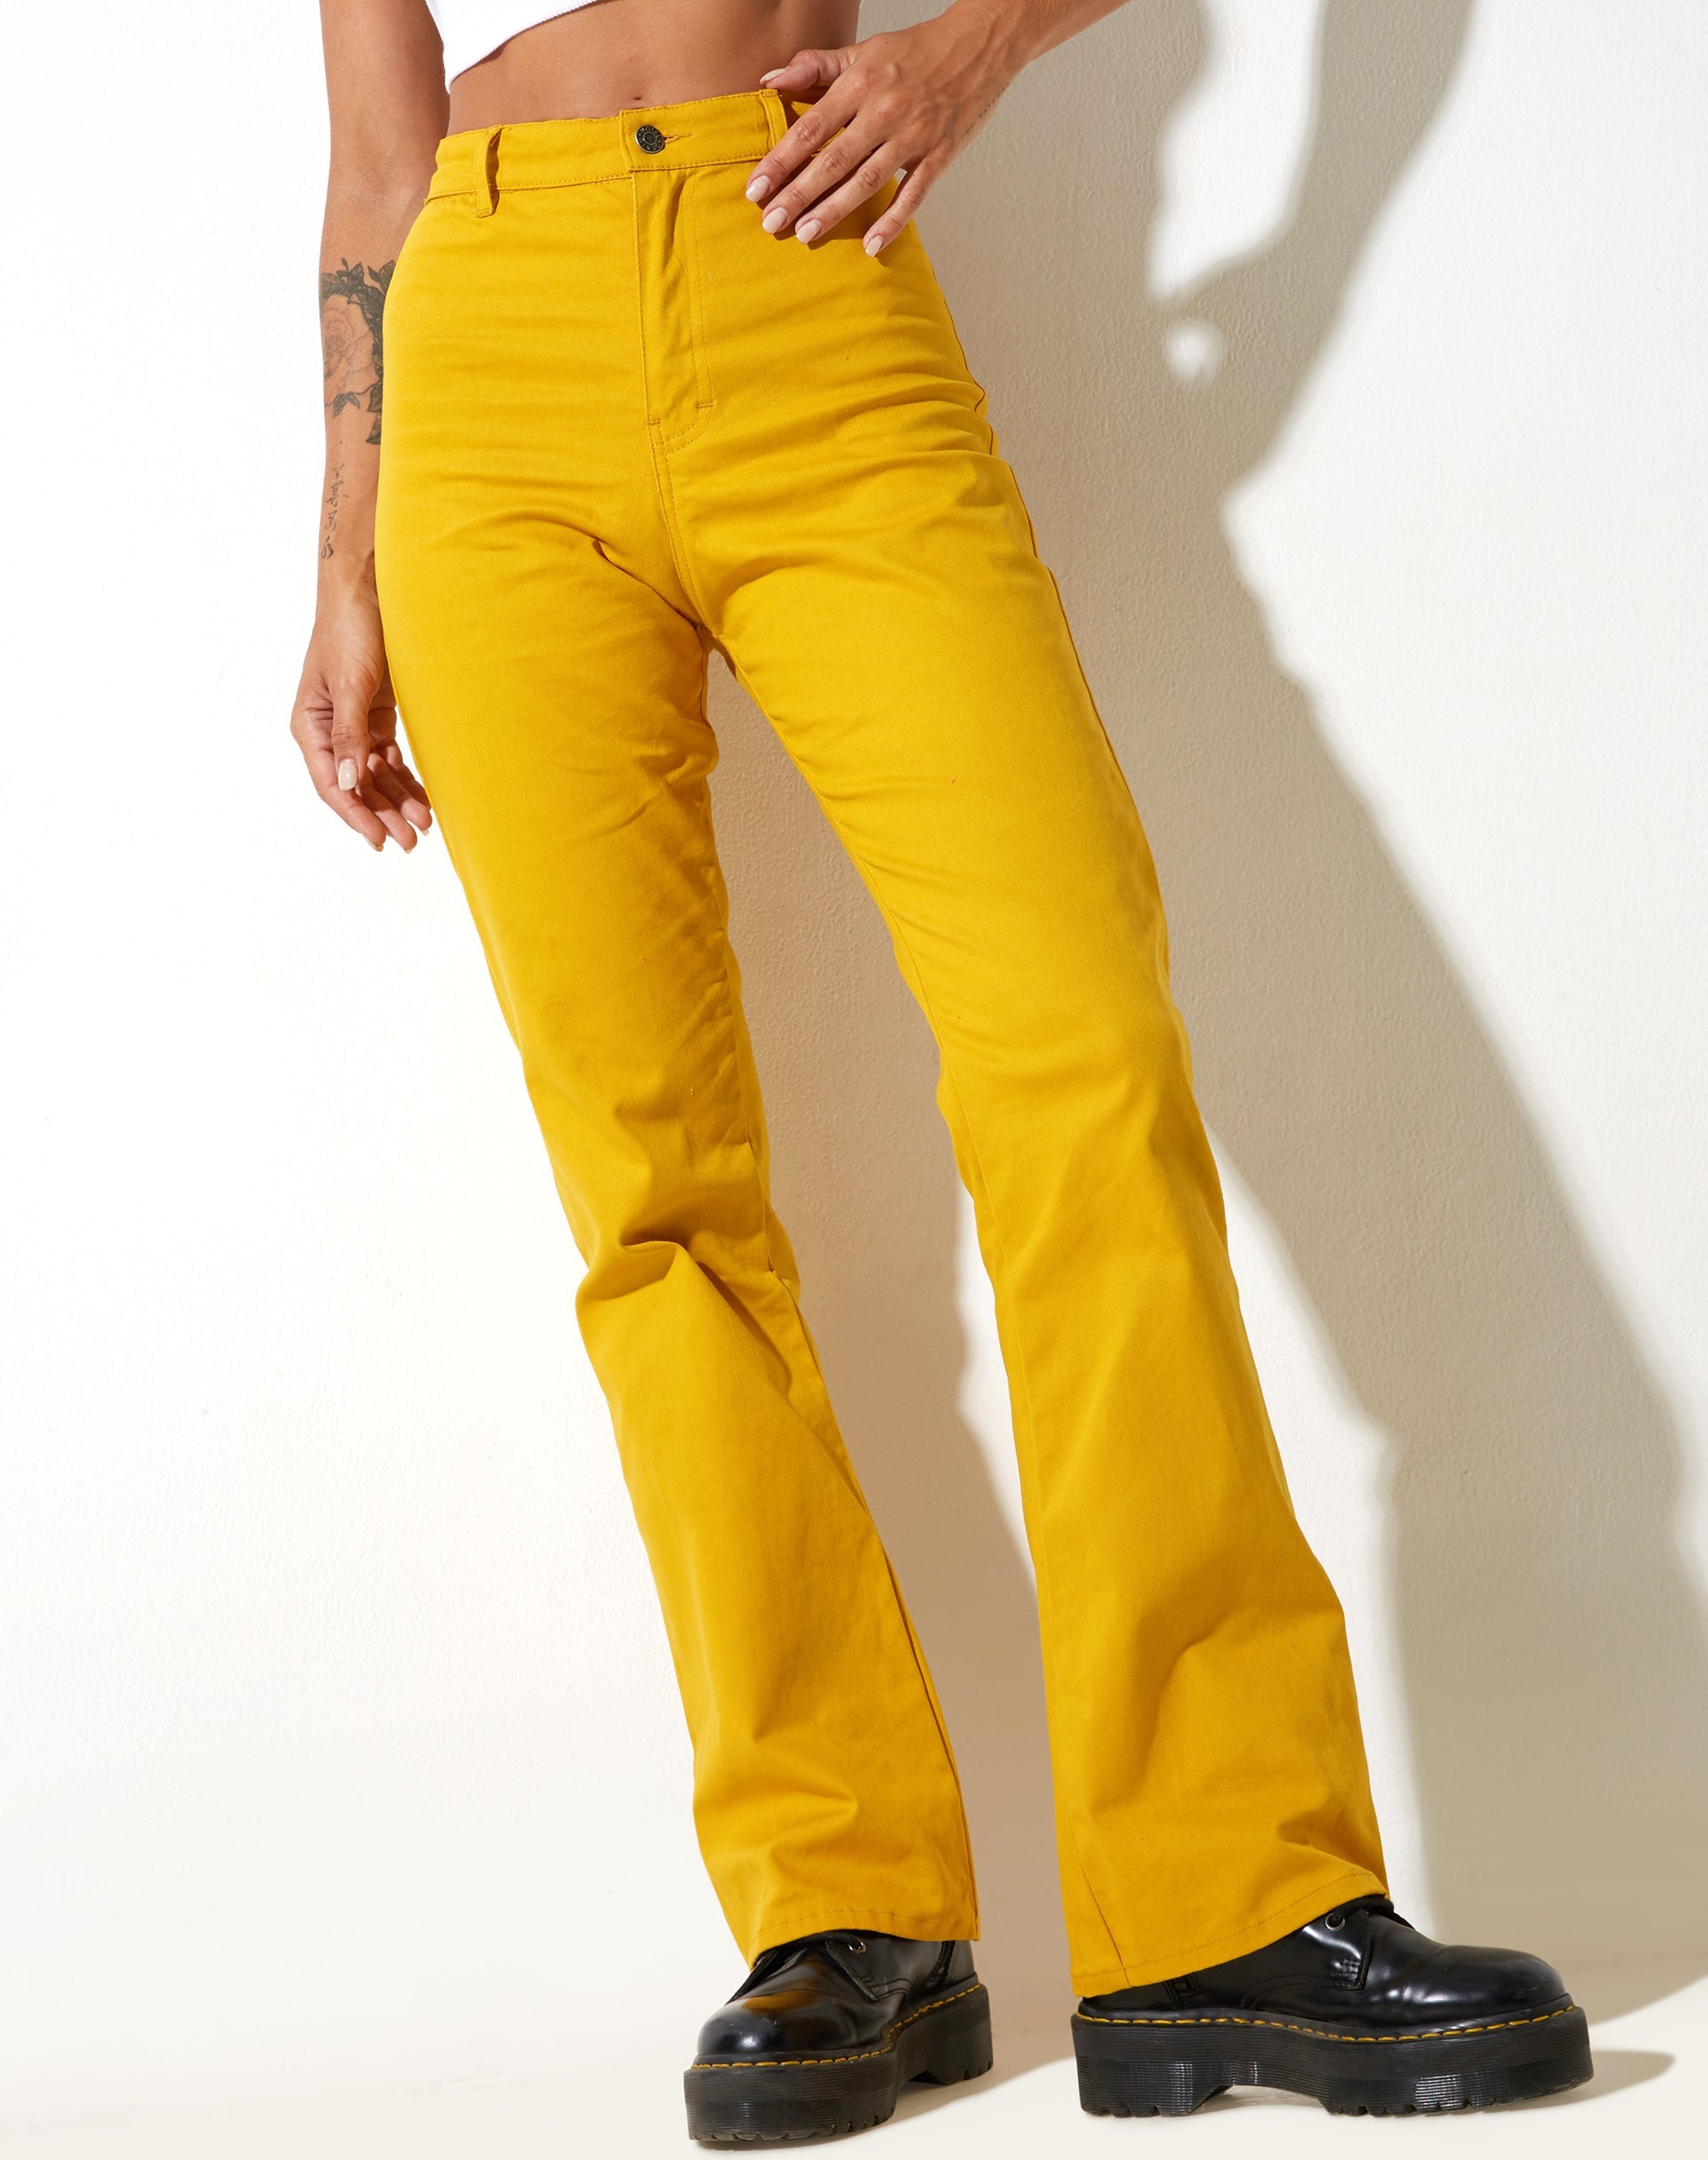 image of Zoven Flare Trouser in Twill Sulfur Mustard